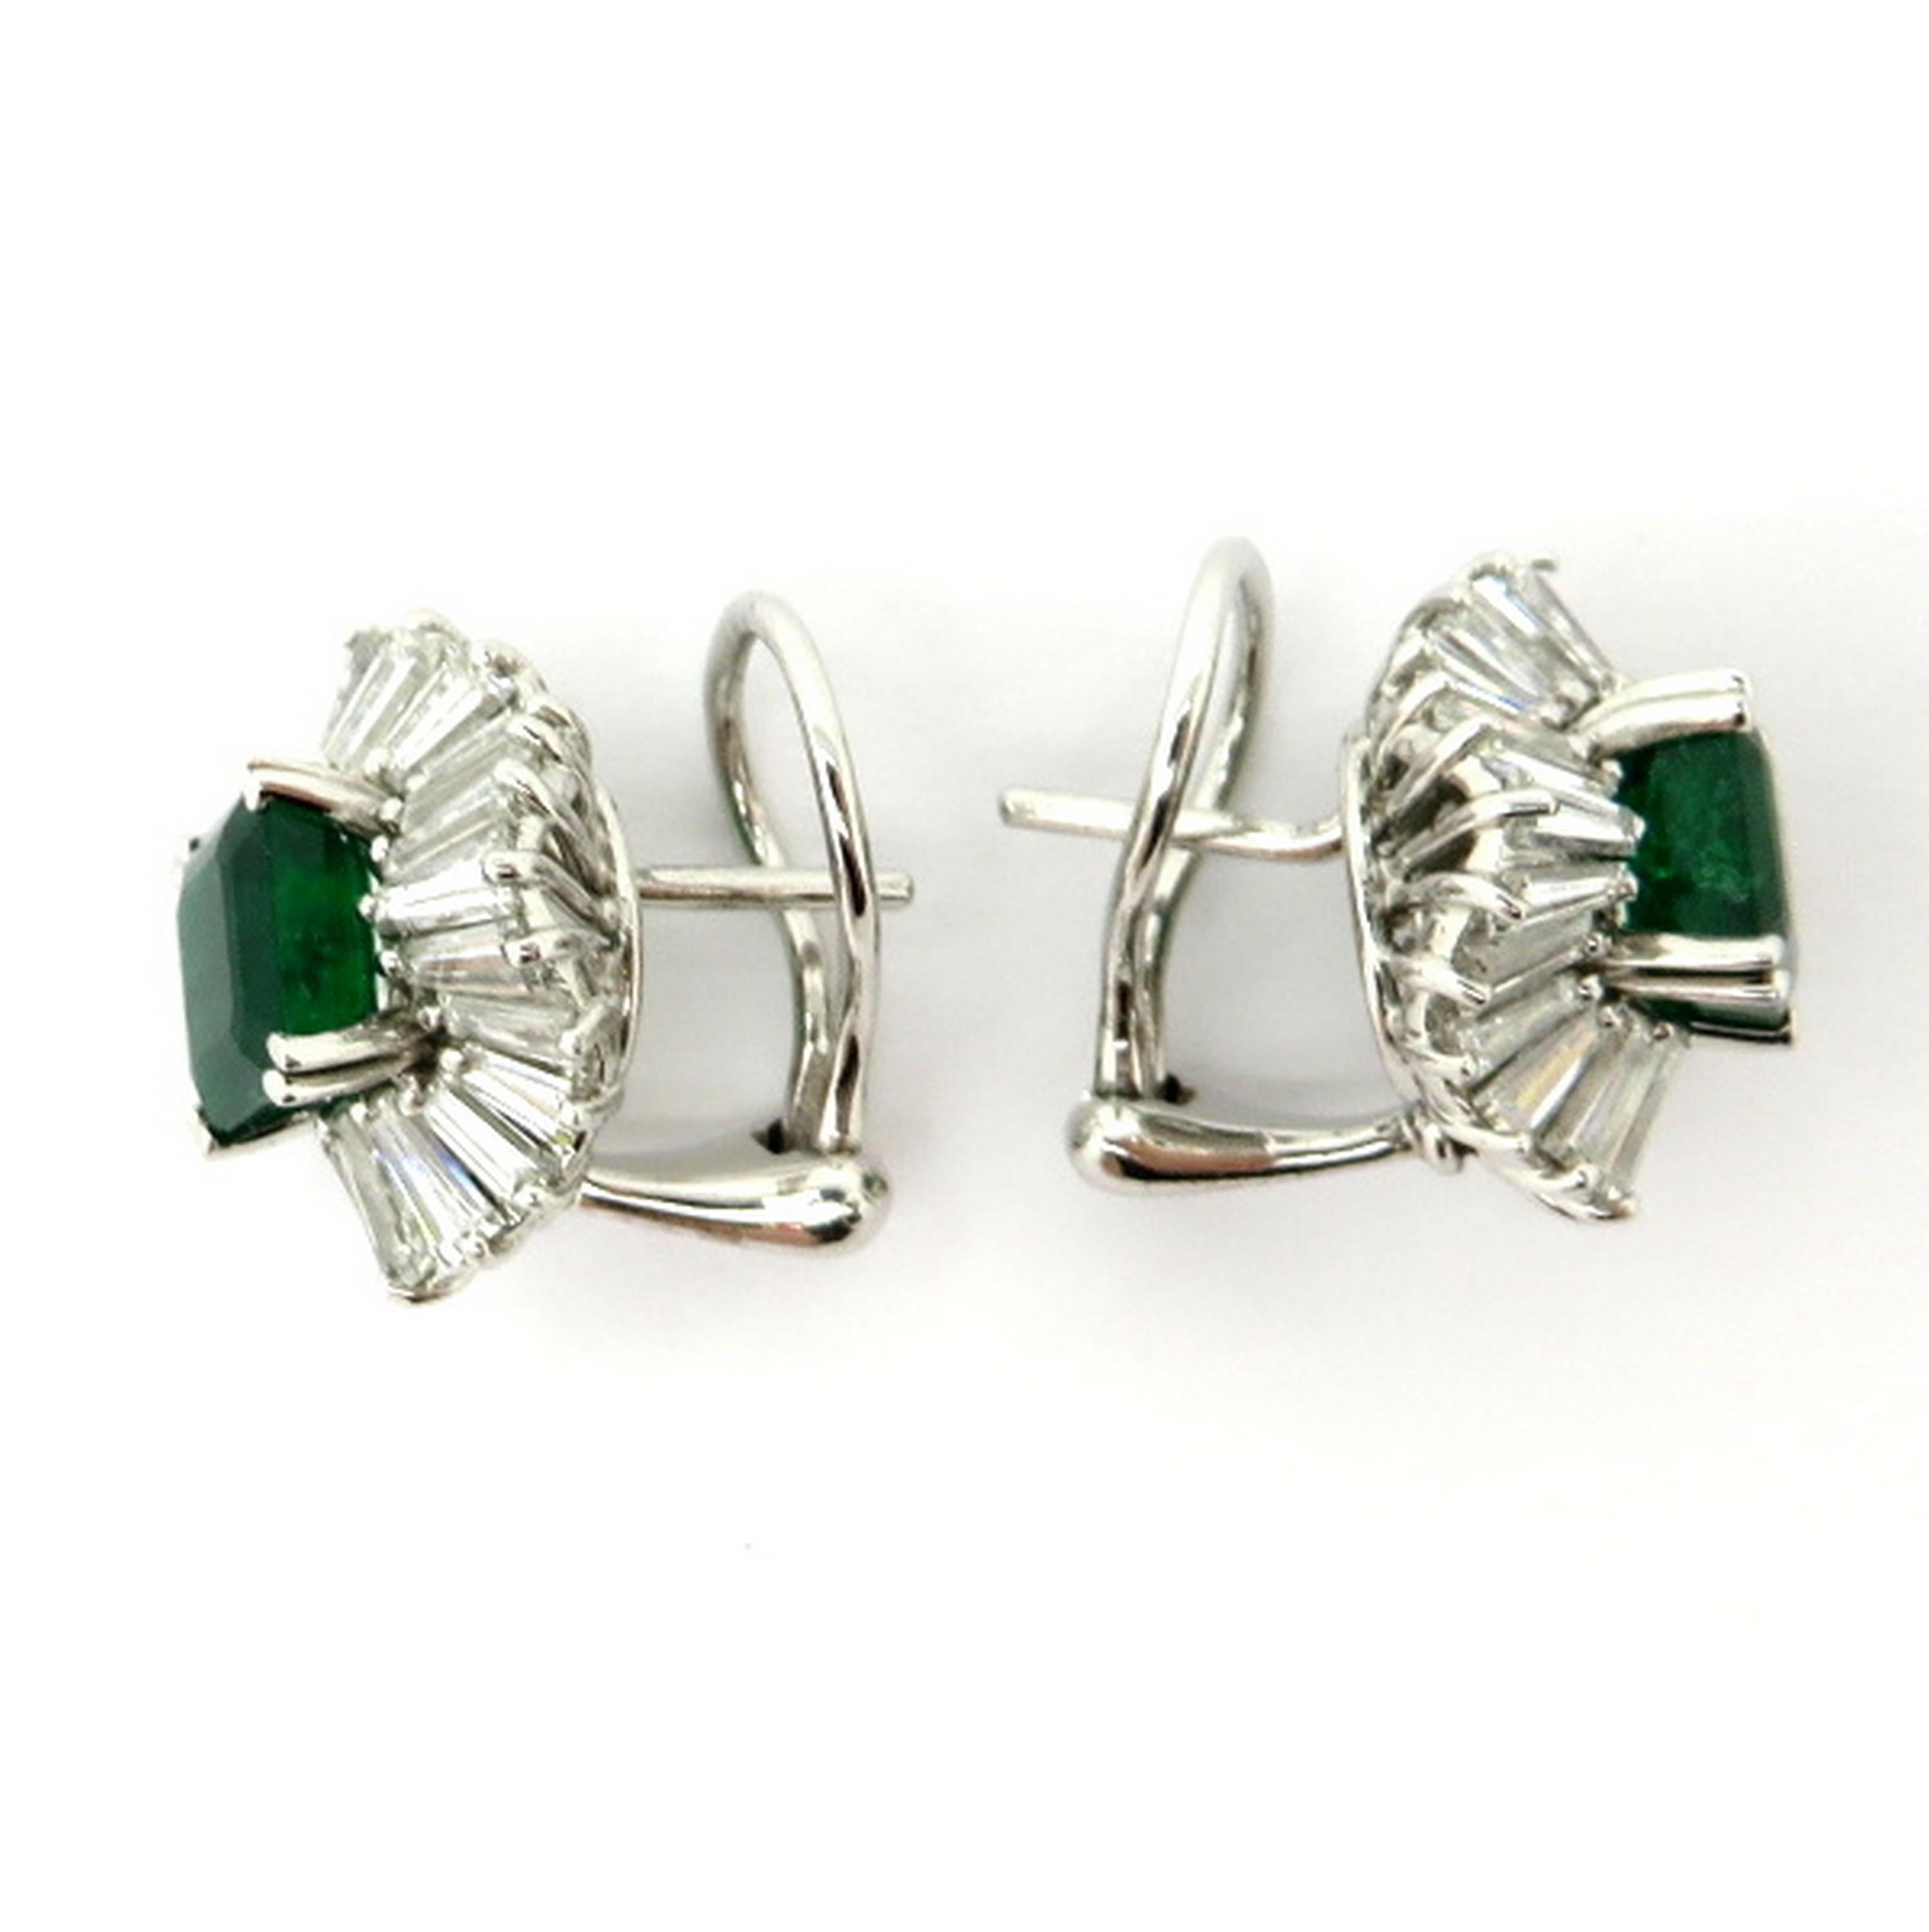 Estate 4.00 carat emerald and 5.00 carat diamond ballerina style earrings. Showcasing two fine quality emerald cut emeralds, claw prong set, weighing approximately 4.00 carats total. Accented with a ballerina halo containing a total of 5.00 carats